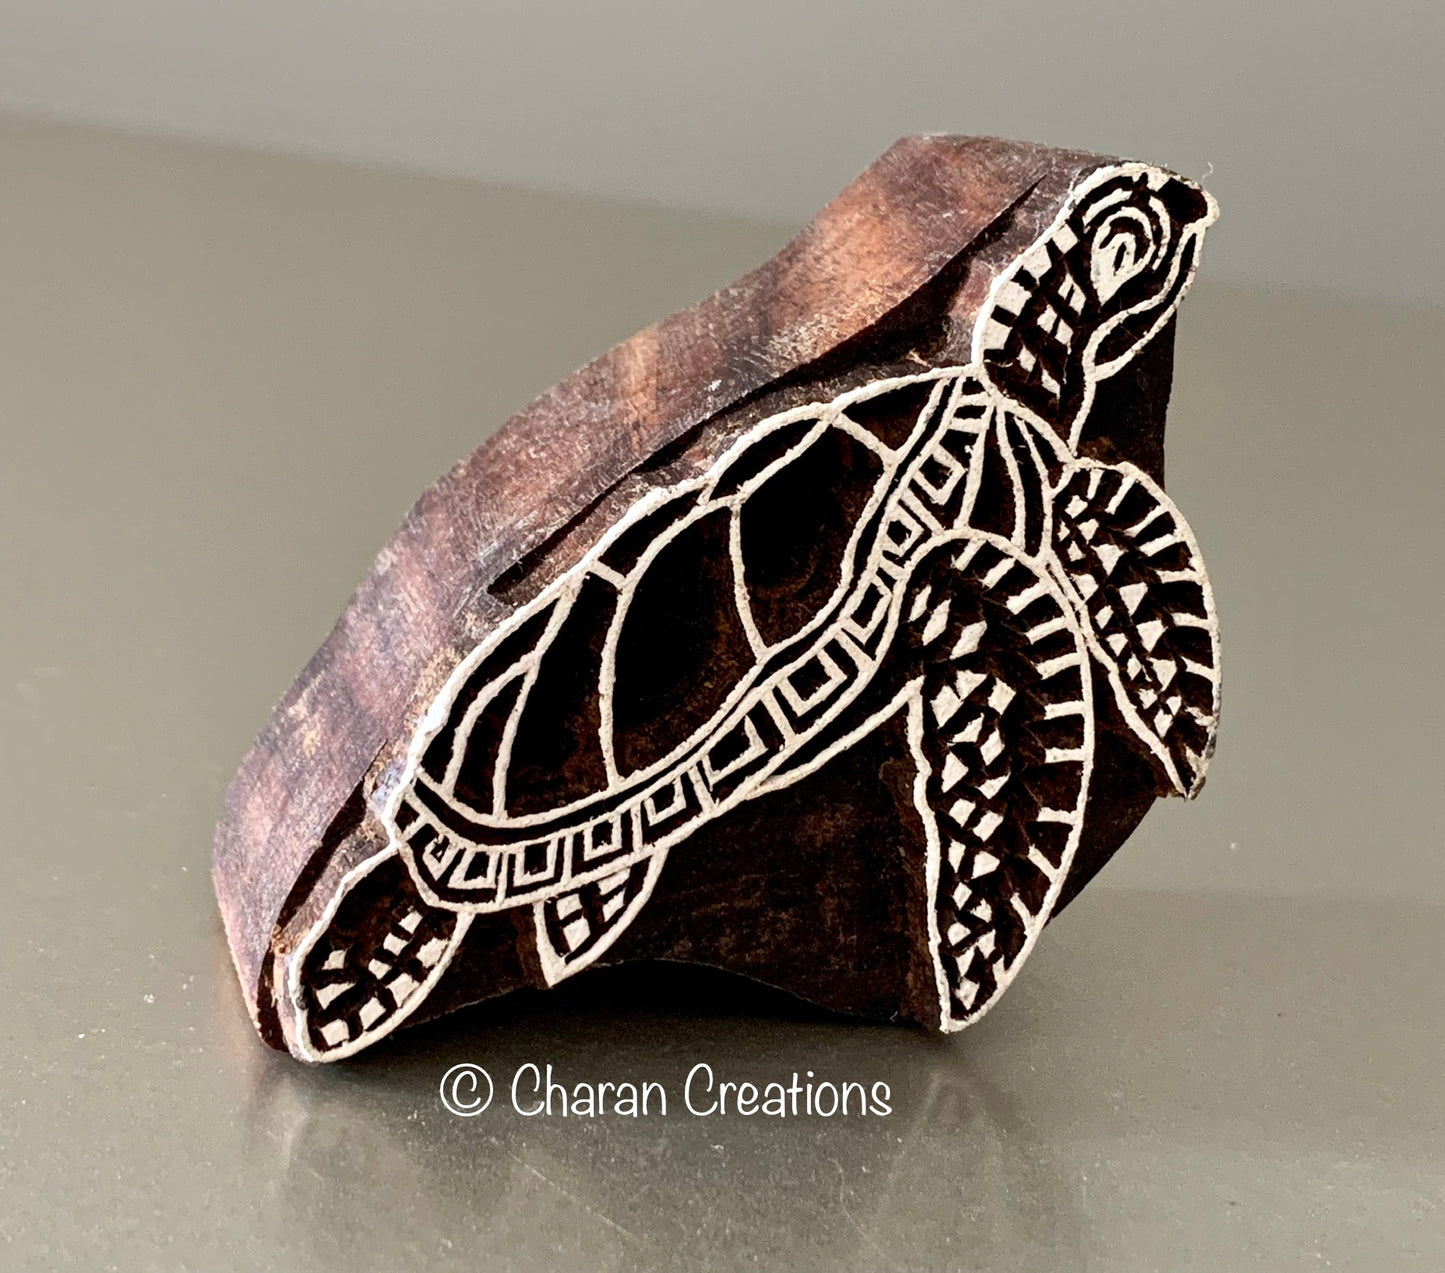 SEA TURTLE Wood Block Stamp for Pottery/Printing